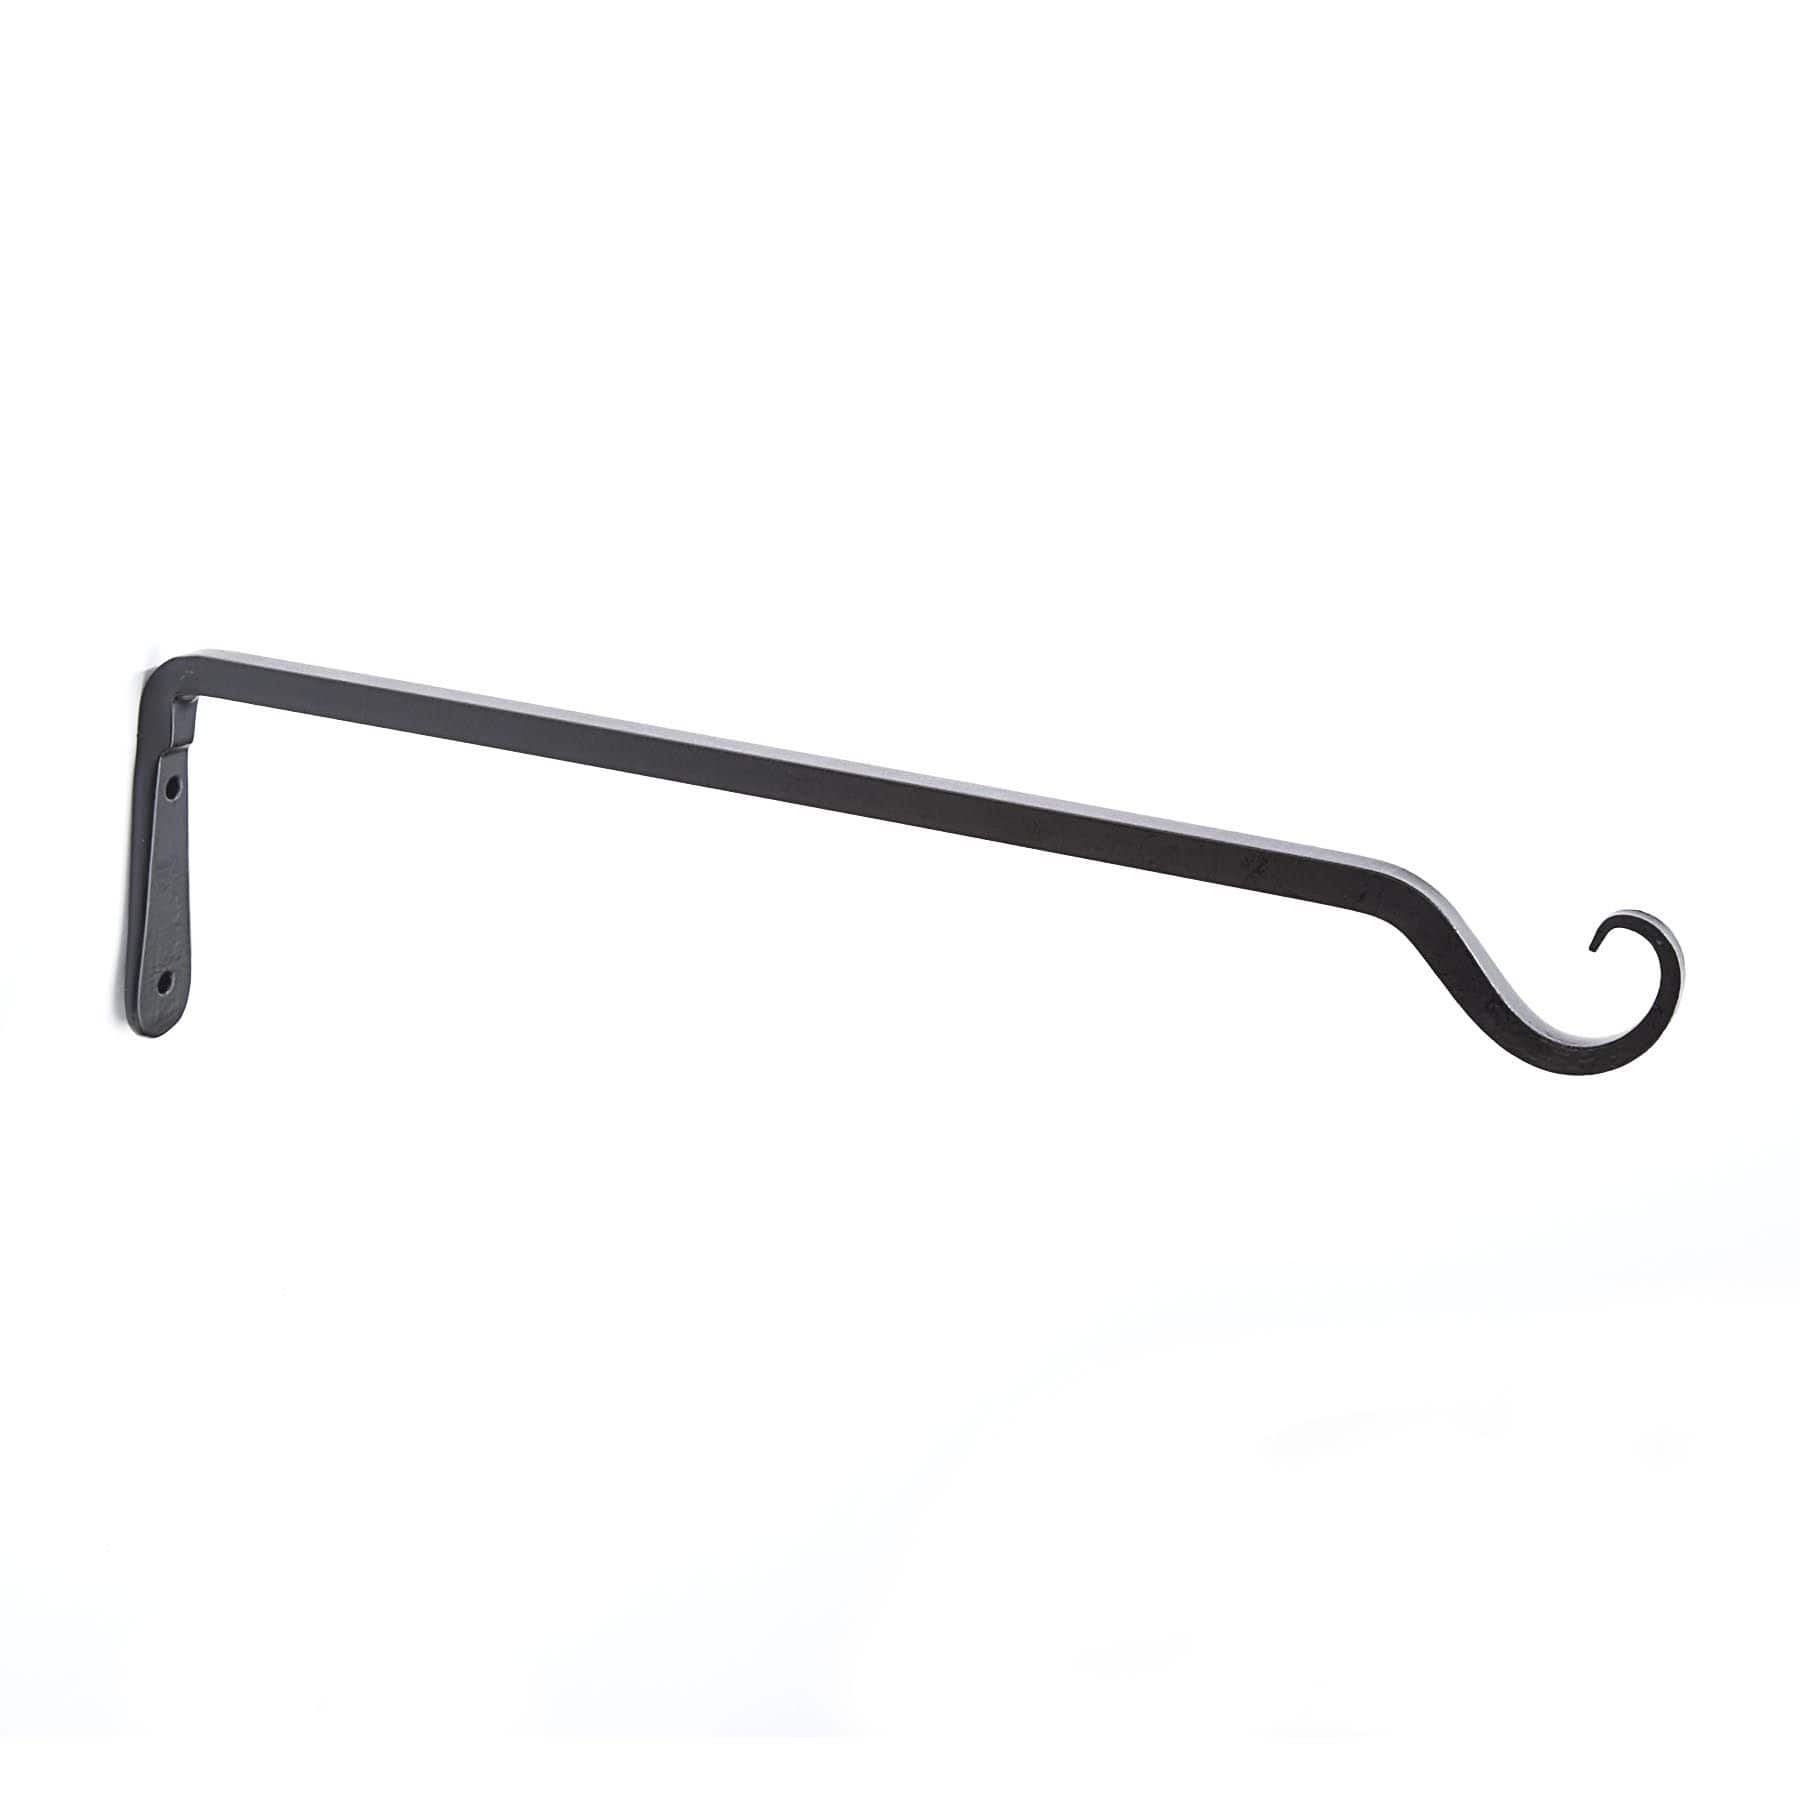 Panacea Forged & Straight Wall Plant Hook/Bracket For Hanging